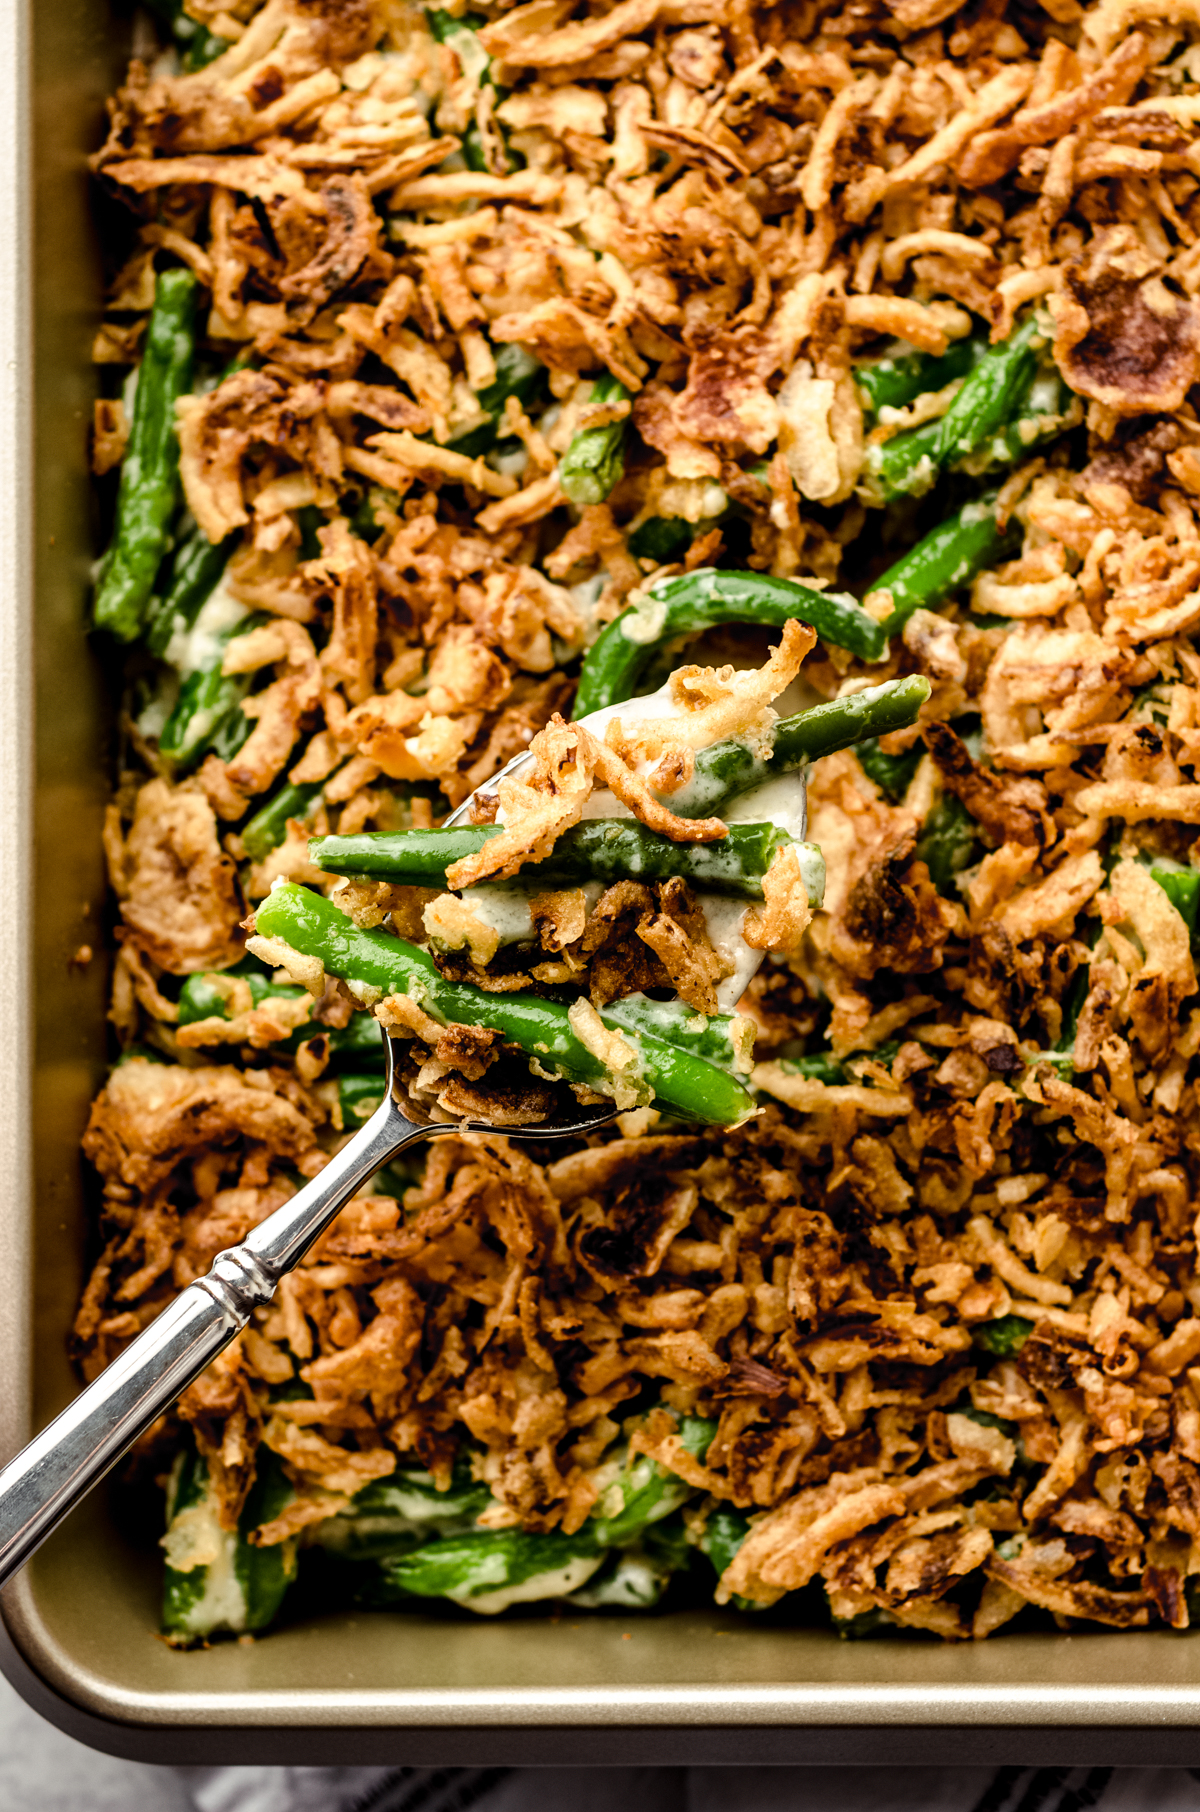 Green bean casserole without mushrooms in a baking dish with a serving spoon.